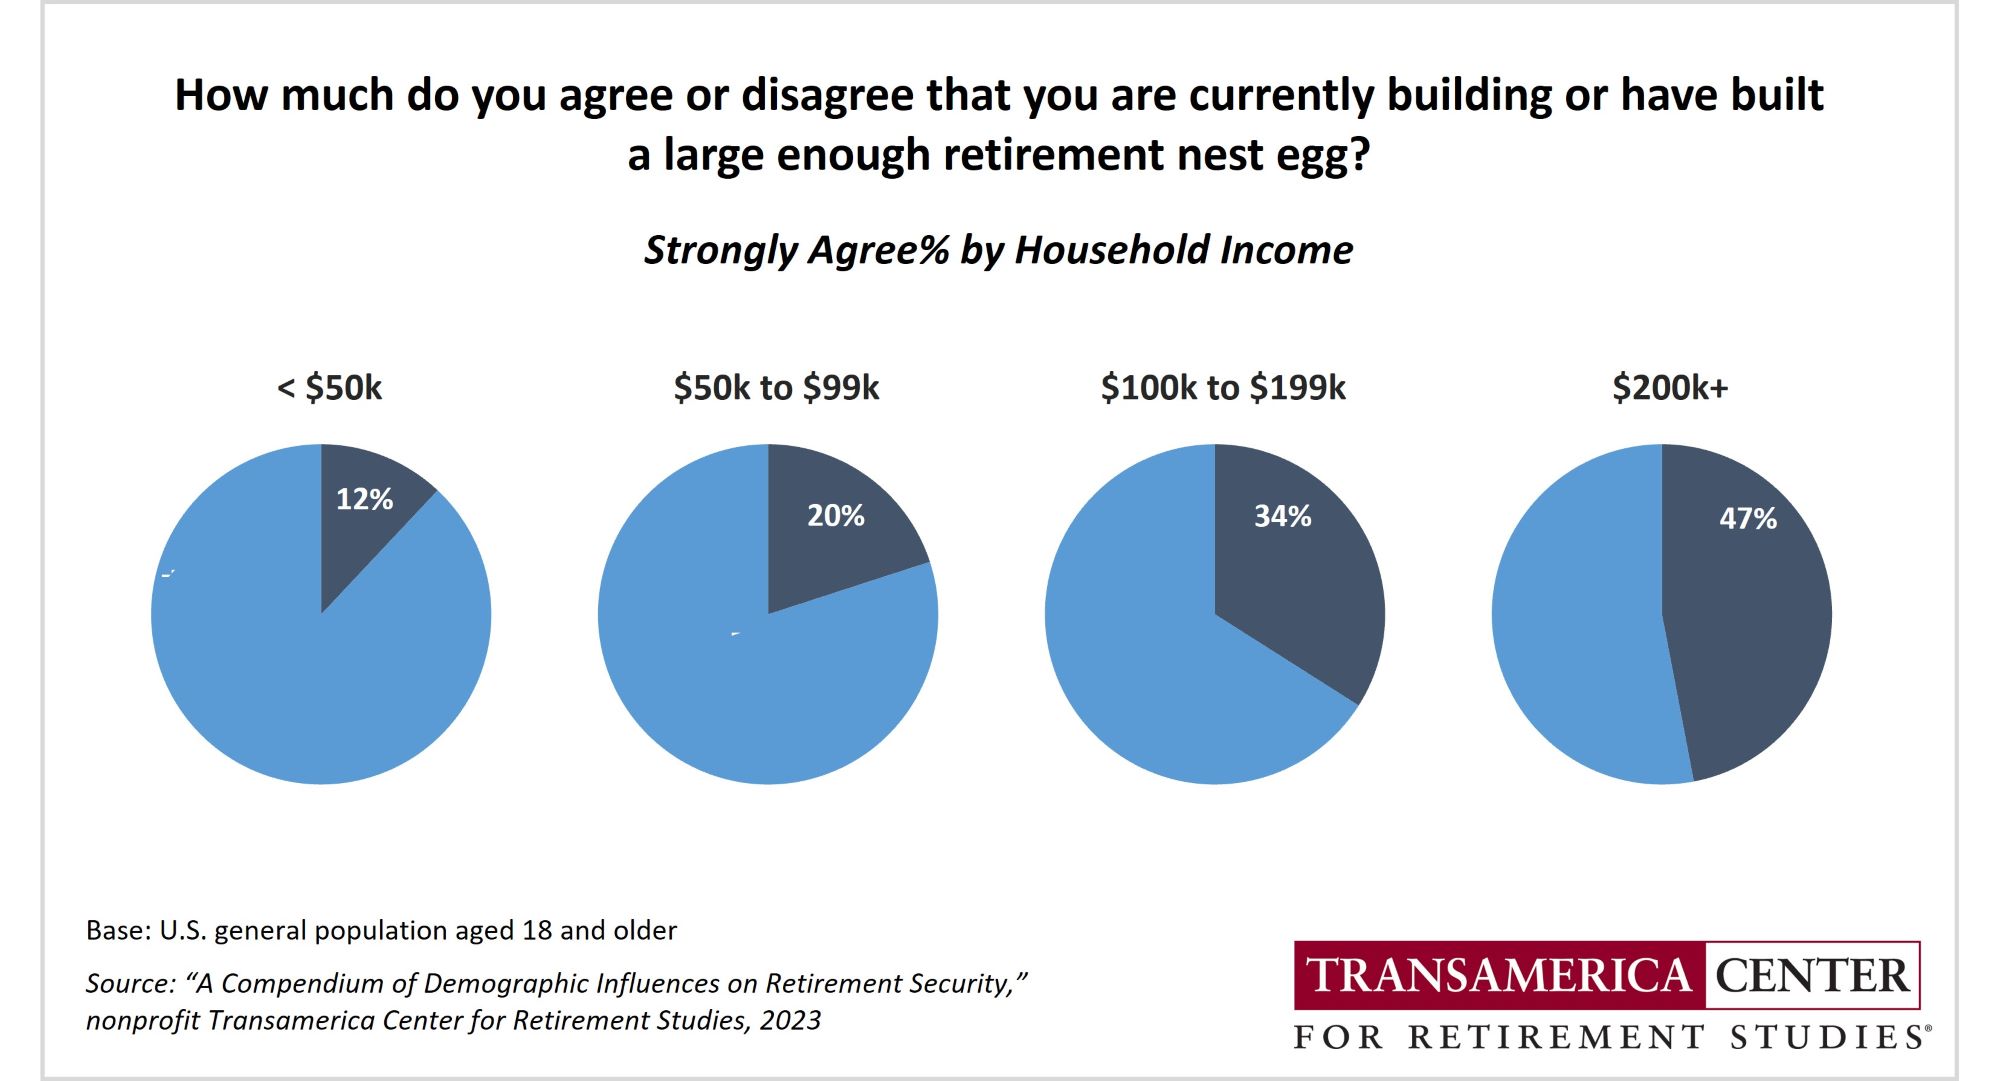 How much do you agree or disagree that you are currently building or have built a large enough retirement nest egg? Strongly Agree %